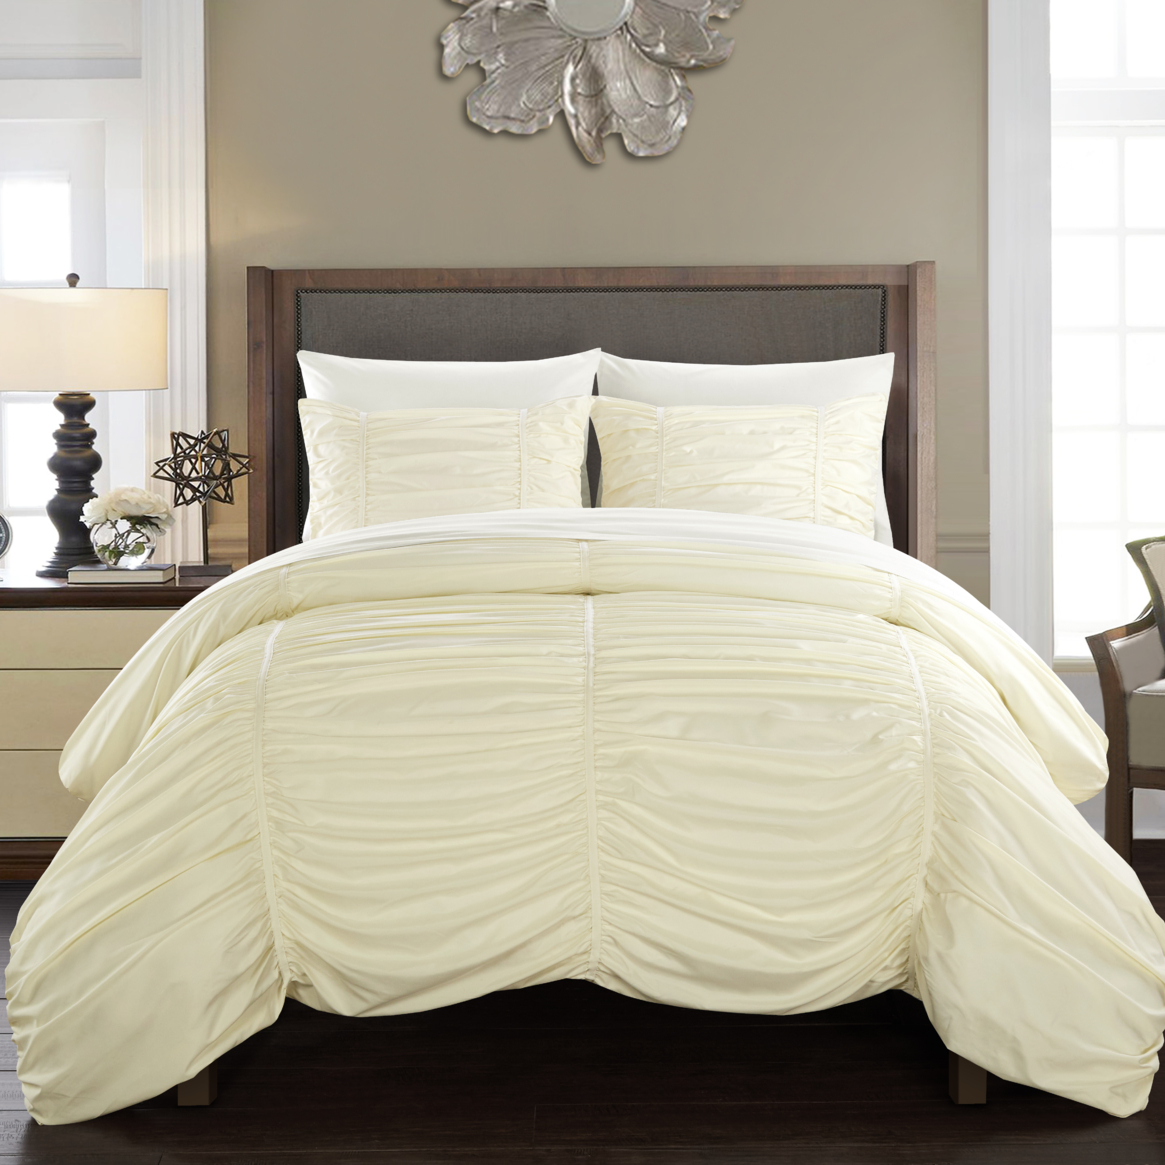 Kleia 7 Or 5 Piece Comforter Set Contemporary Striped Ruched Ruffled Design Bed In A Bag - White, Twin X-long